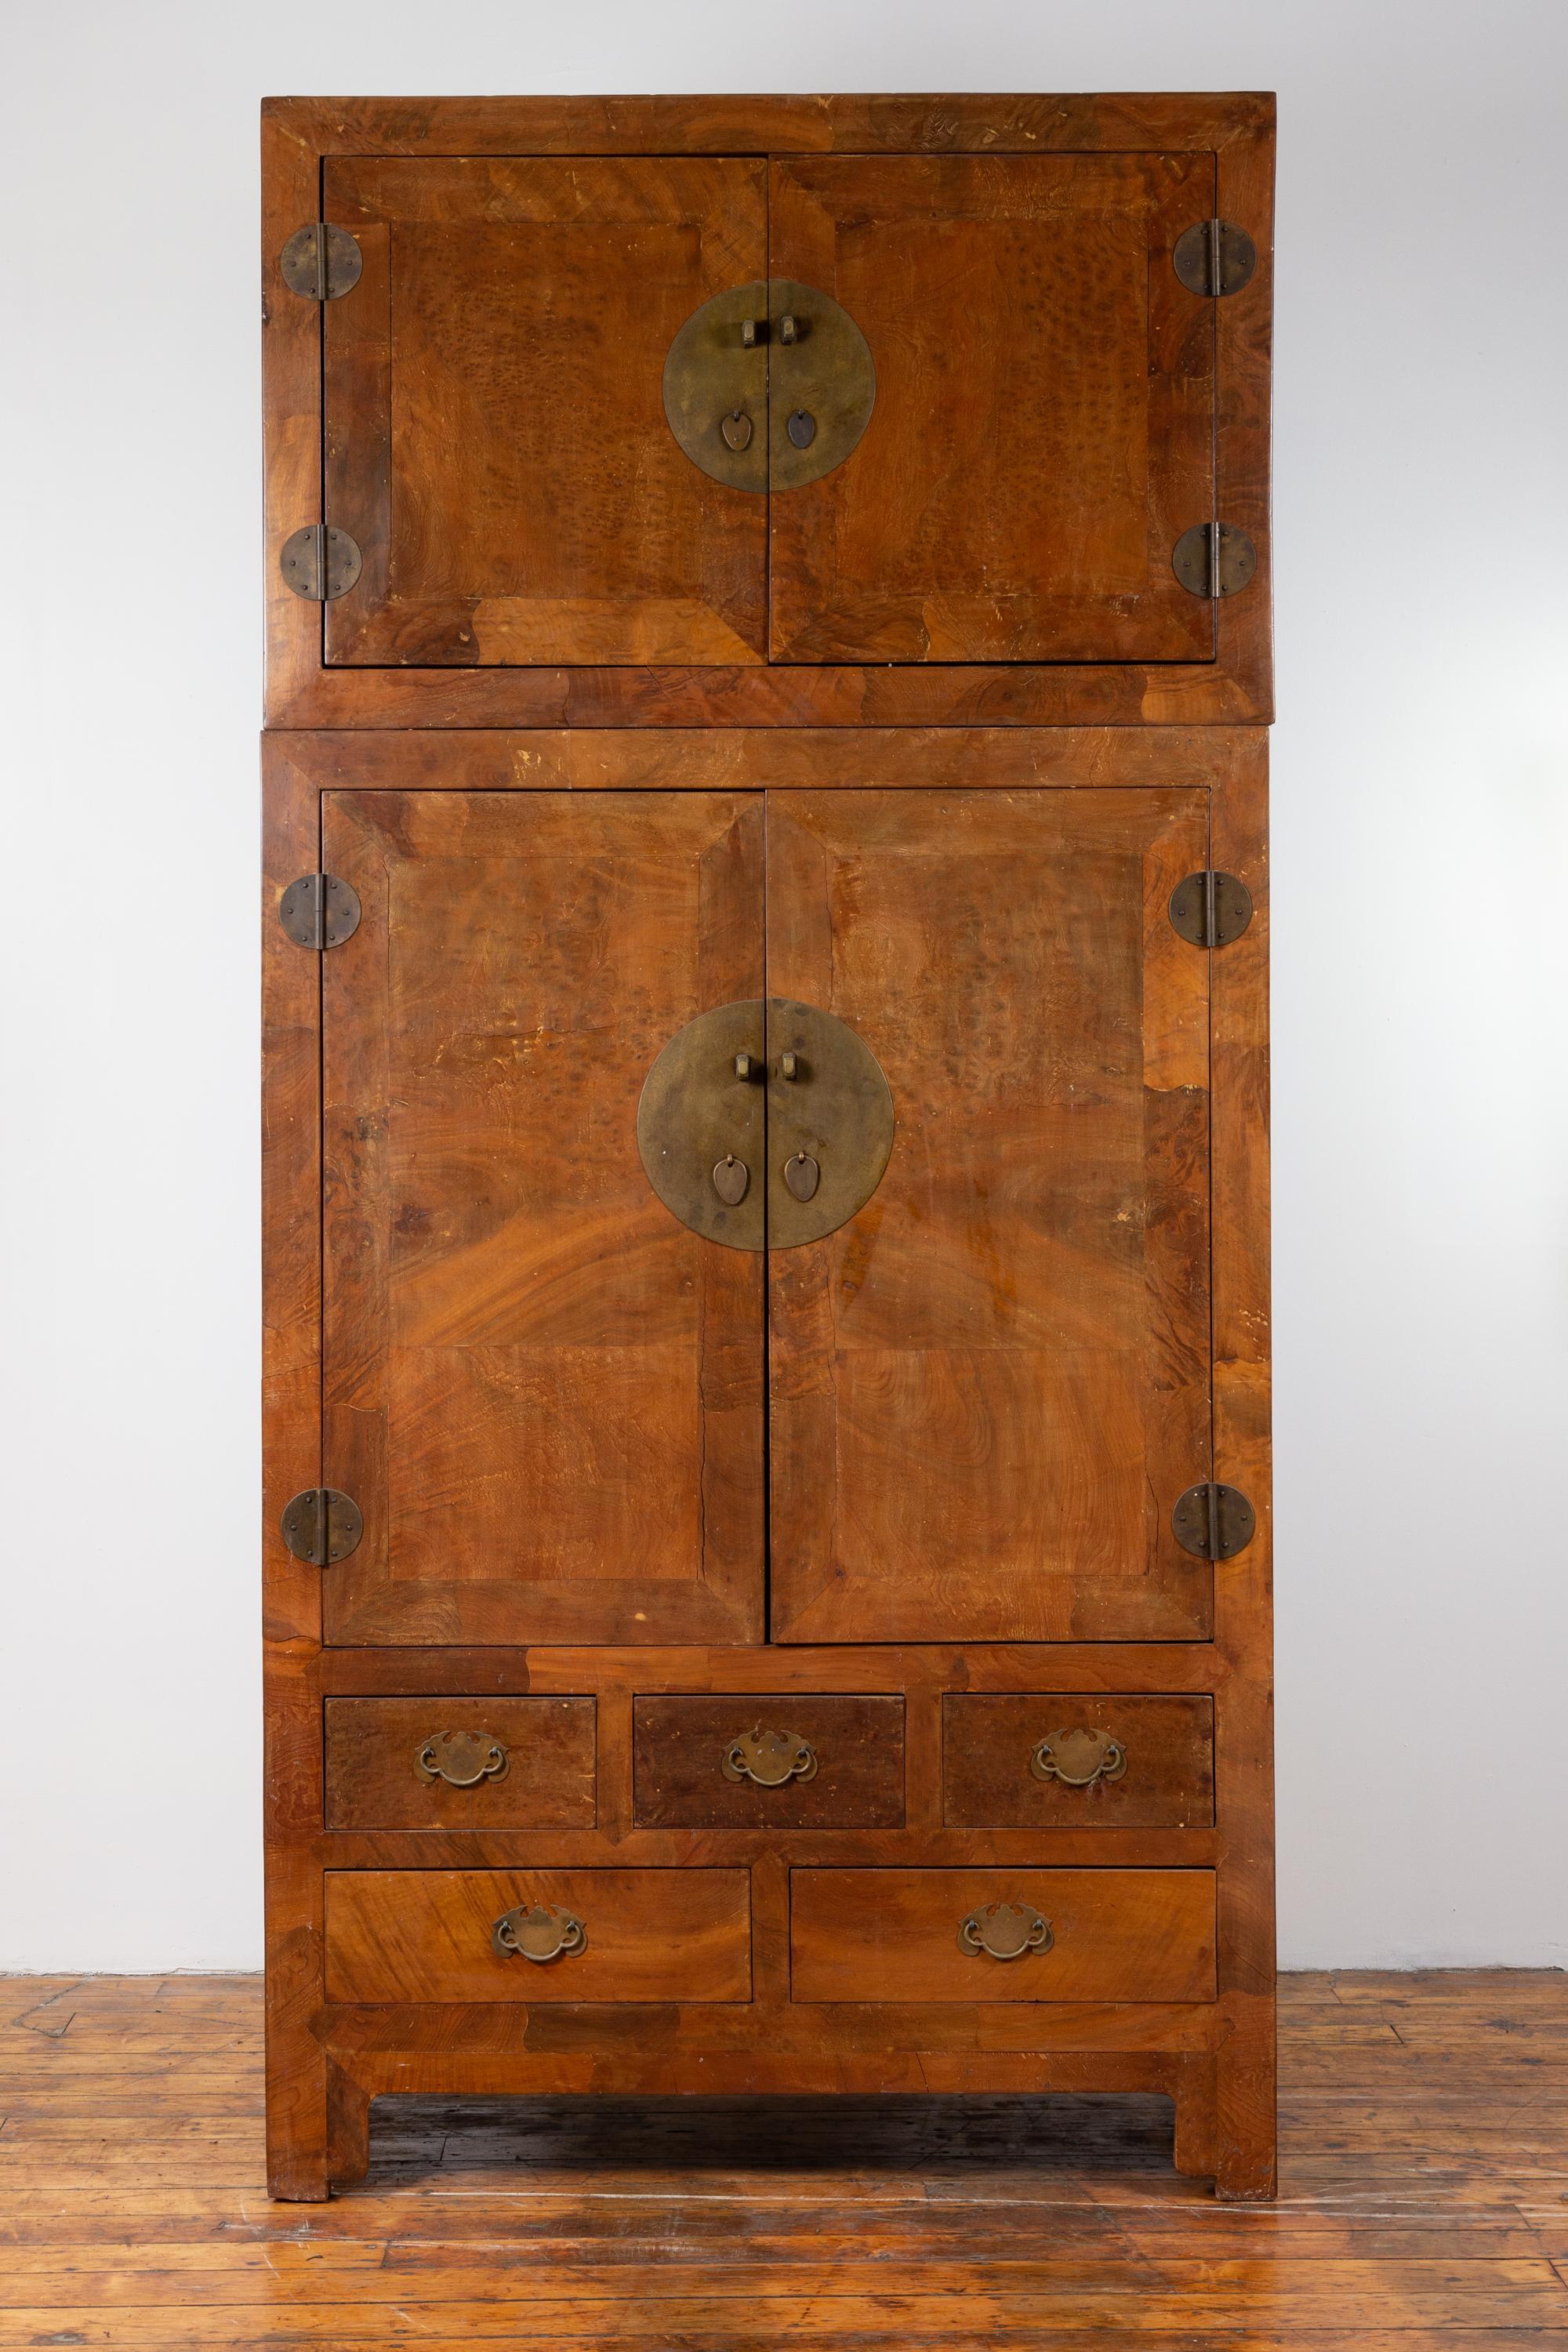 A large vintage elm compound two-part wedding wardrobe, with two sets of double doors, lower drawers and brass hardware. This mid-20th-century large Chinese elm wedding wardrobe beautifully marries traditional design with functional elegance. The